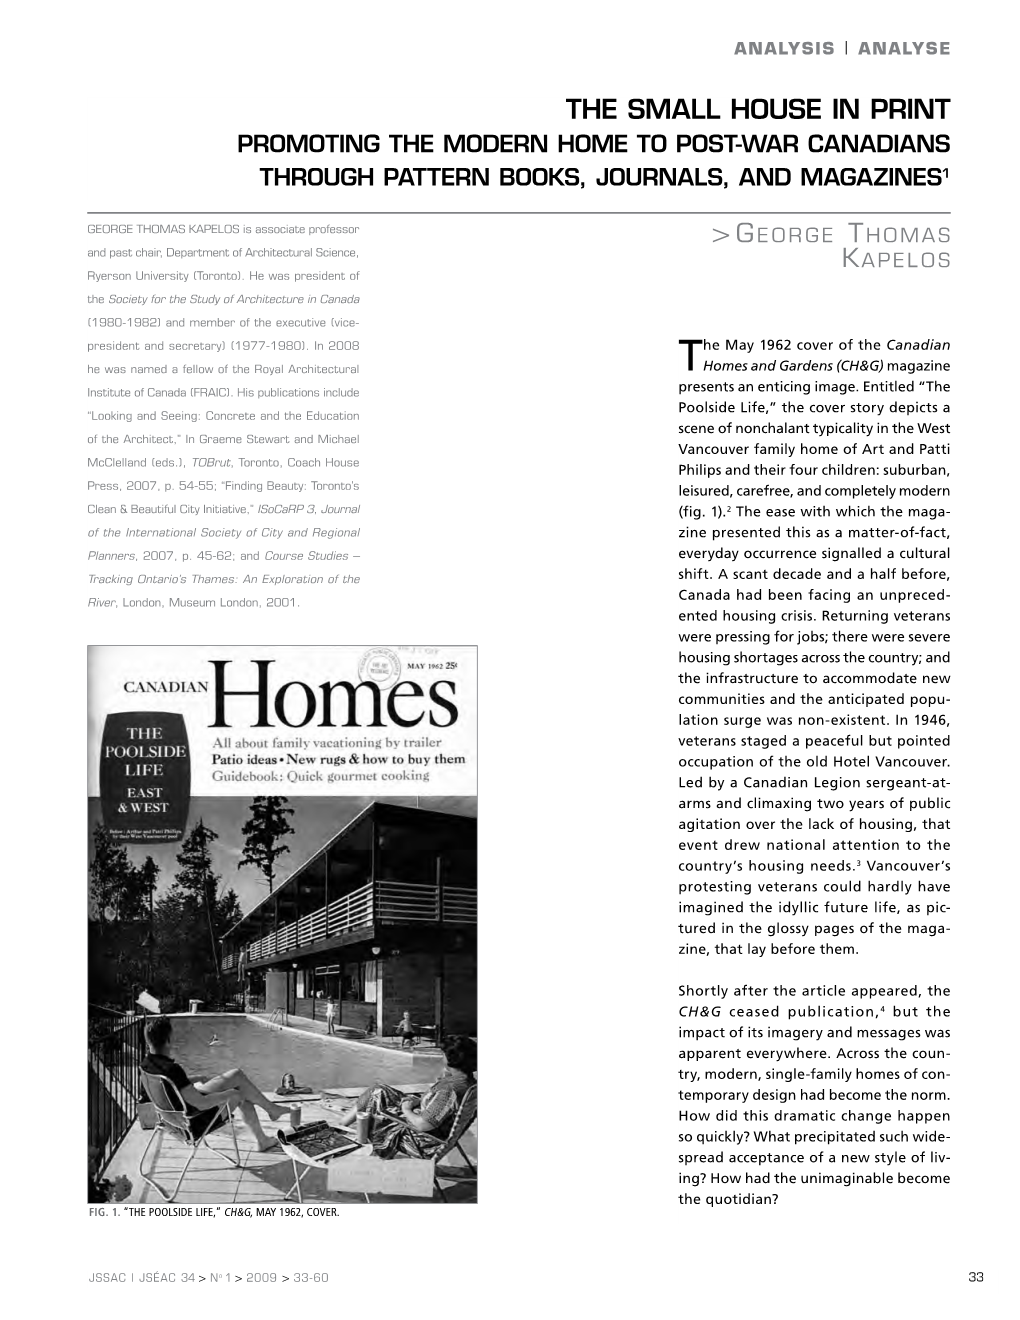 The Small House in Print Promoting the Modern Home to Post-War Canadians Through Pattern Books, Journals, and Magazines1